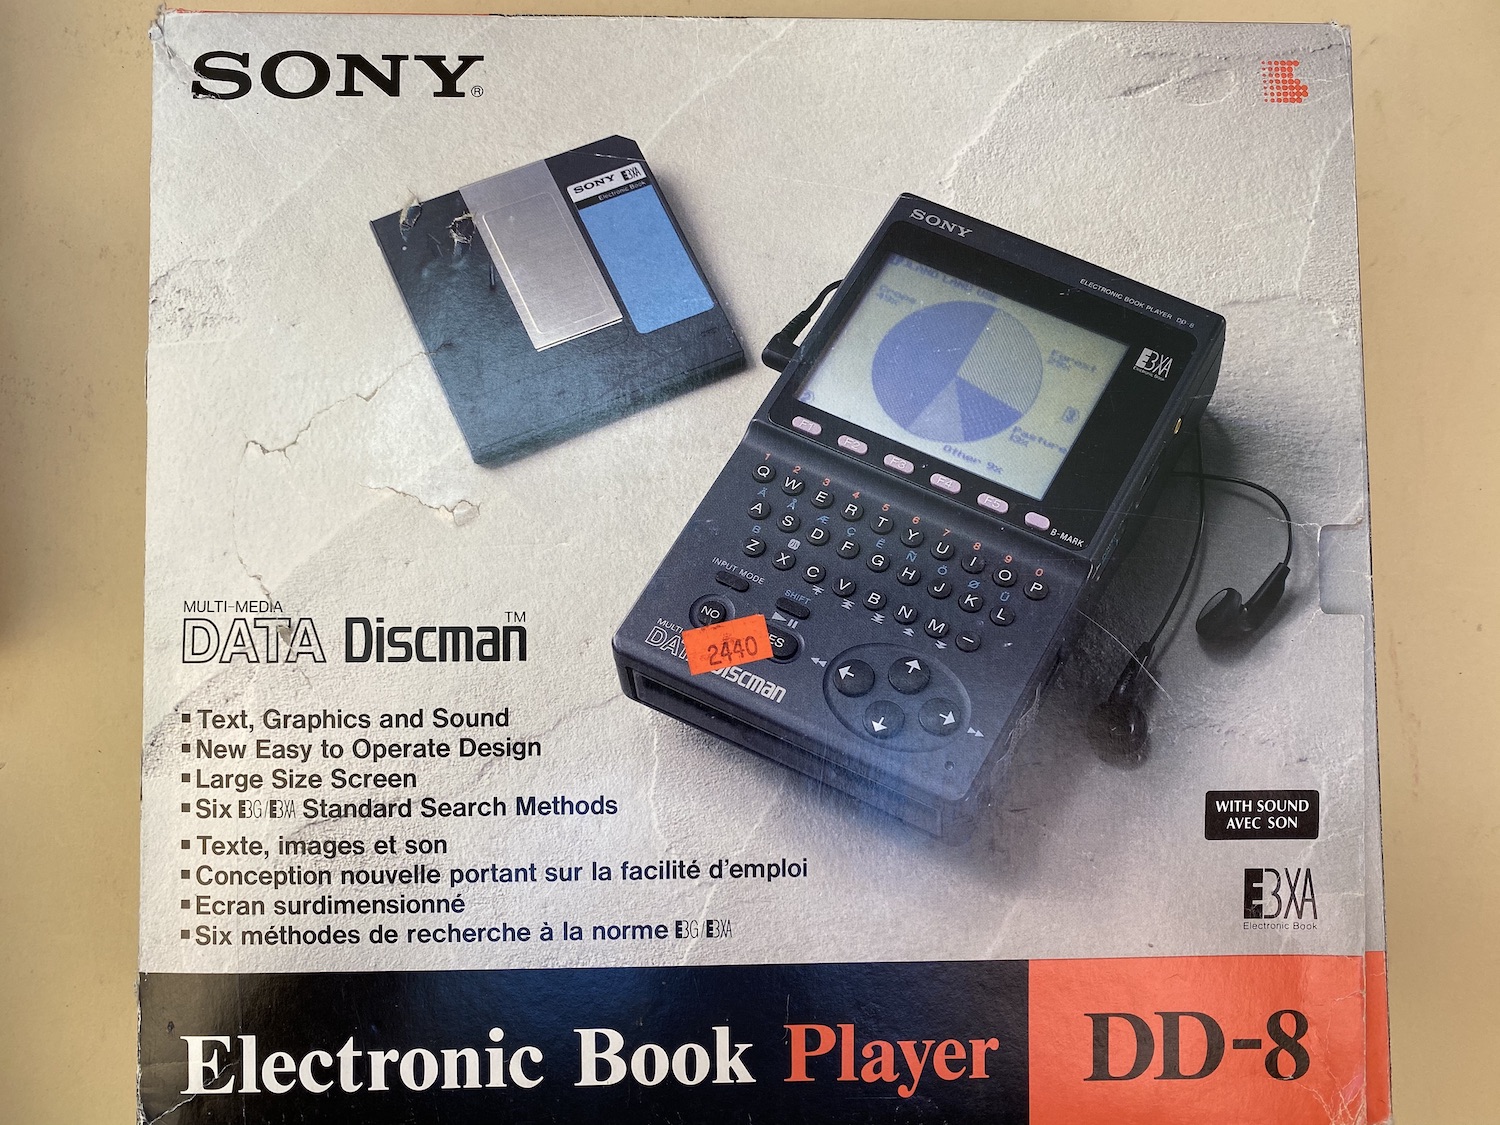 The upper cover of the original box for the Sony Data Discman DD-8 prominently marketed the device as an "Electronic Book Player."